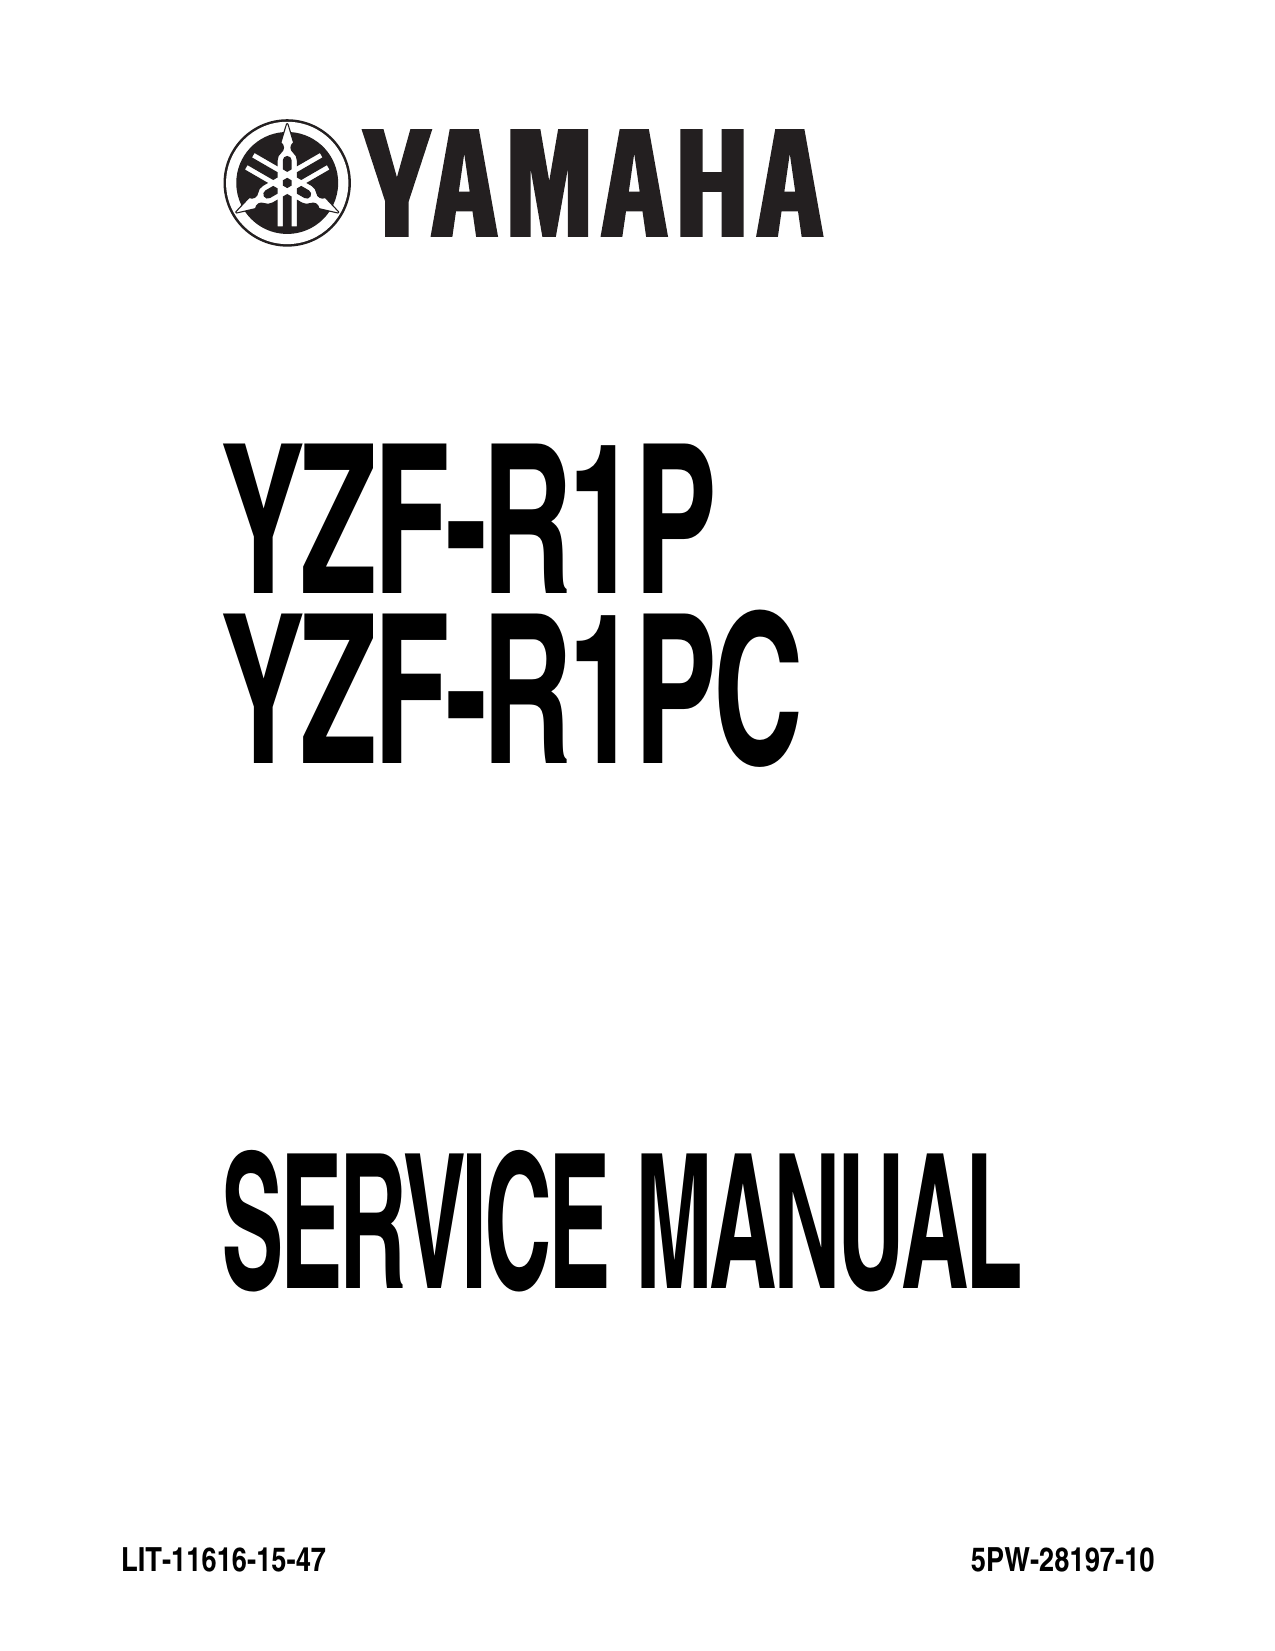 2002-2003 Yamaha YZF-R1, YZF-R1P , YZF-R1PC service and shop manual Preview image 1